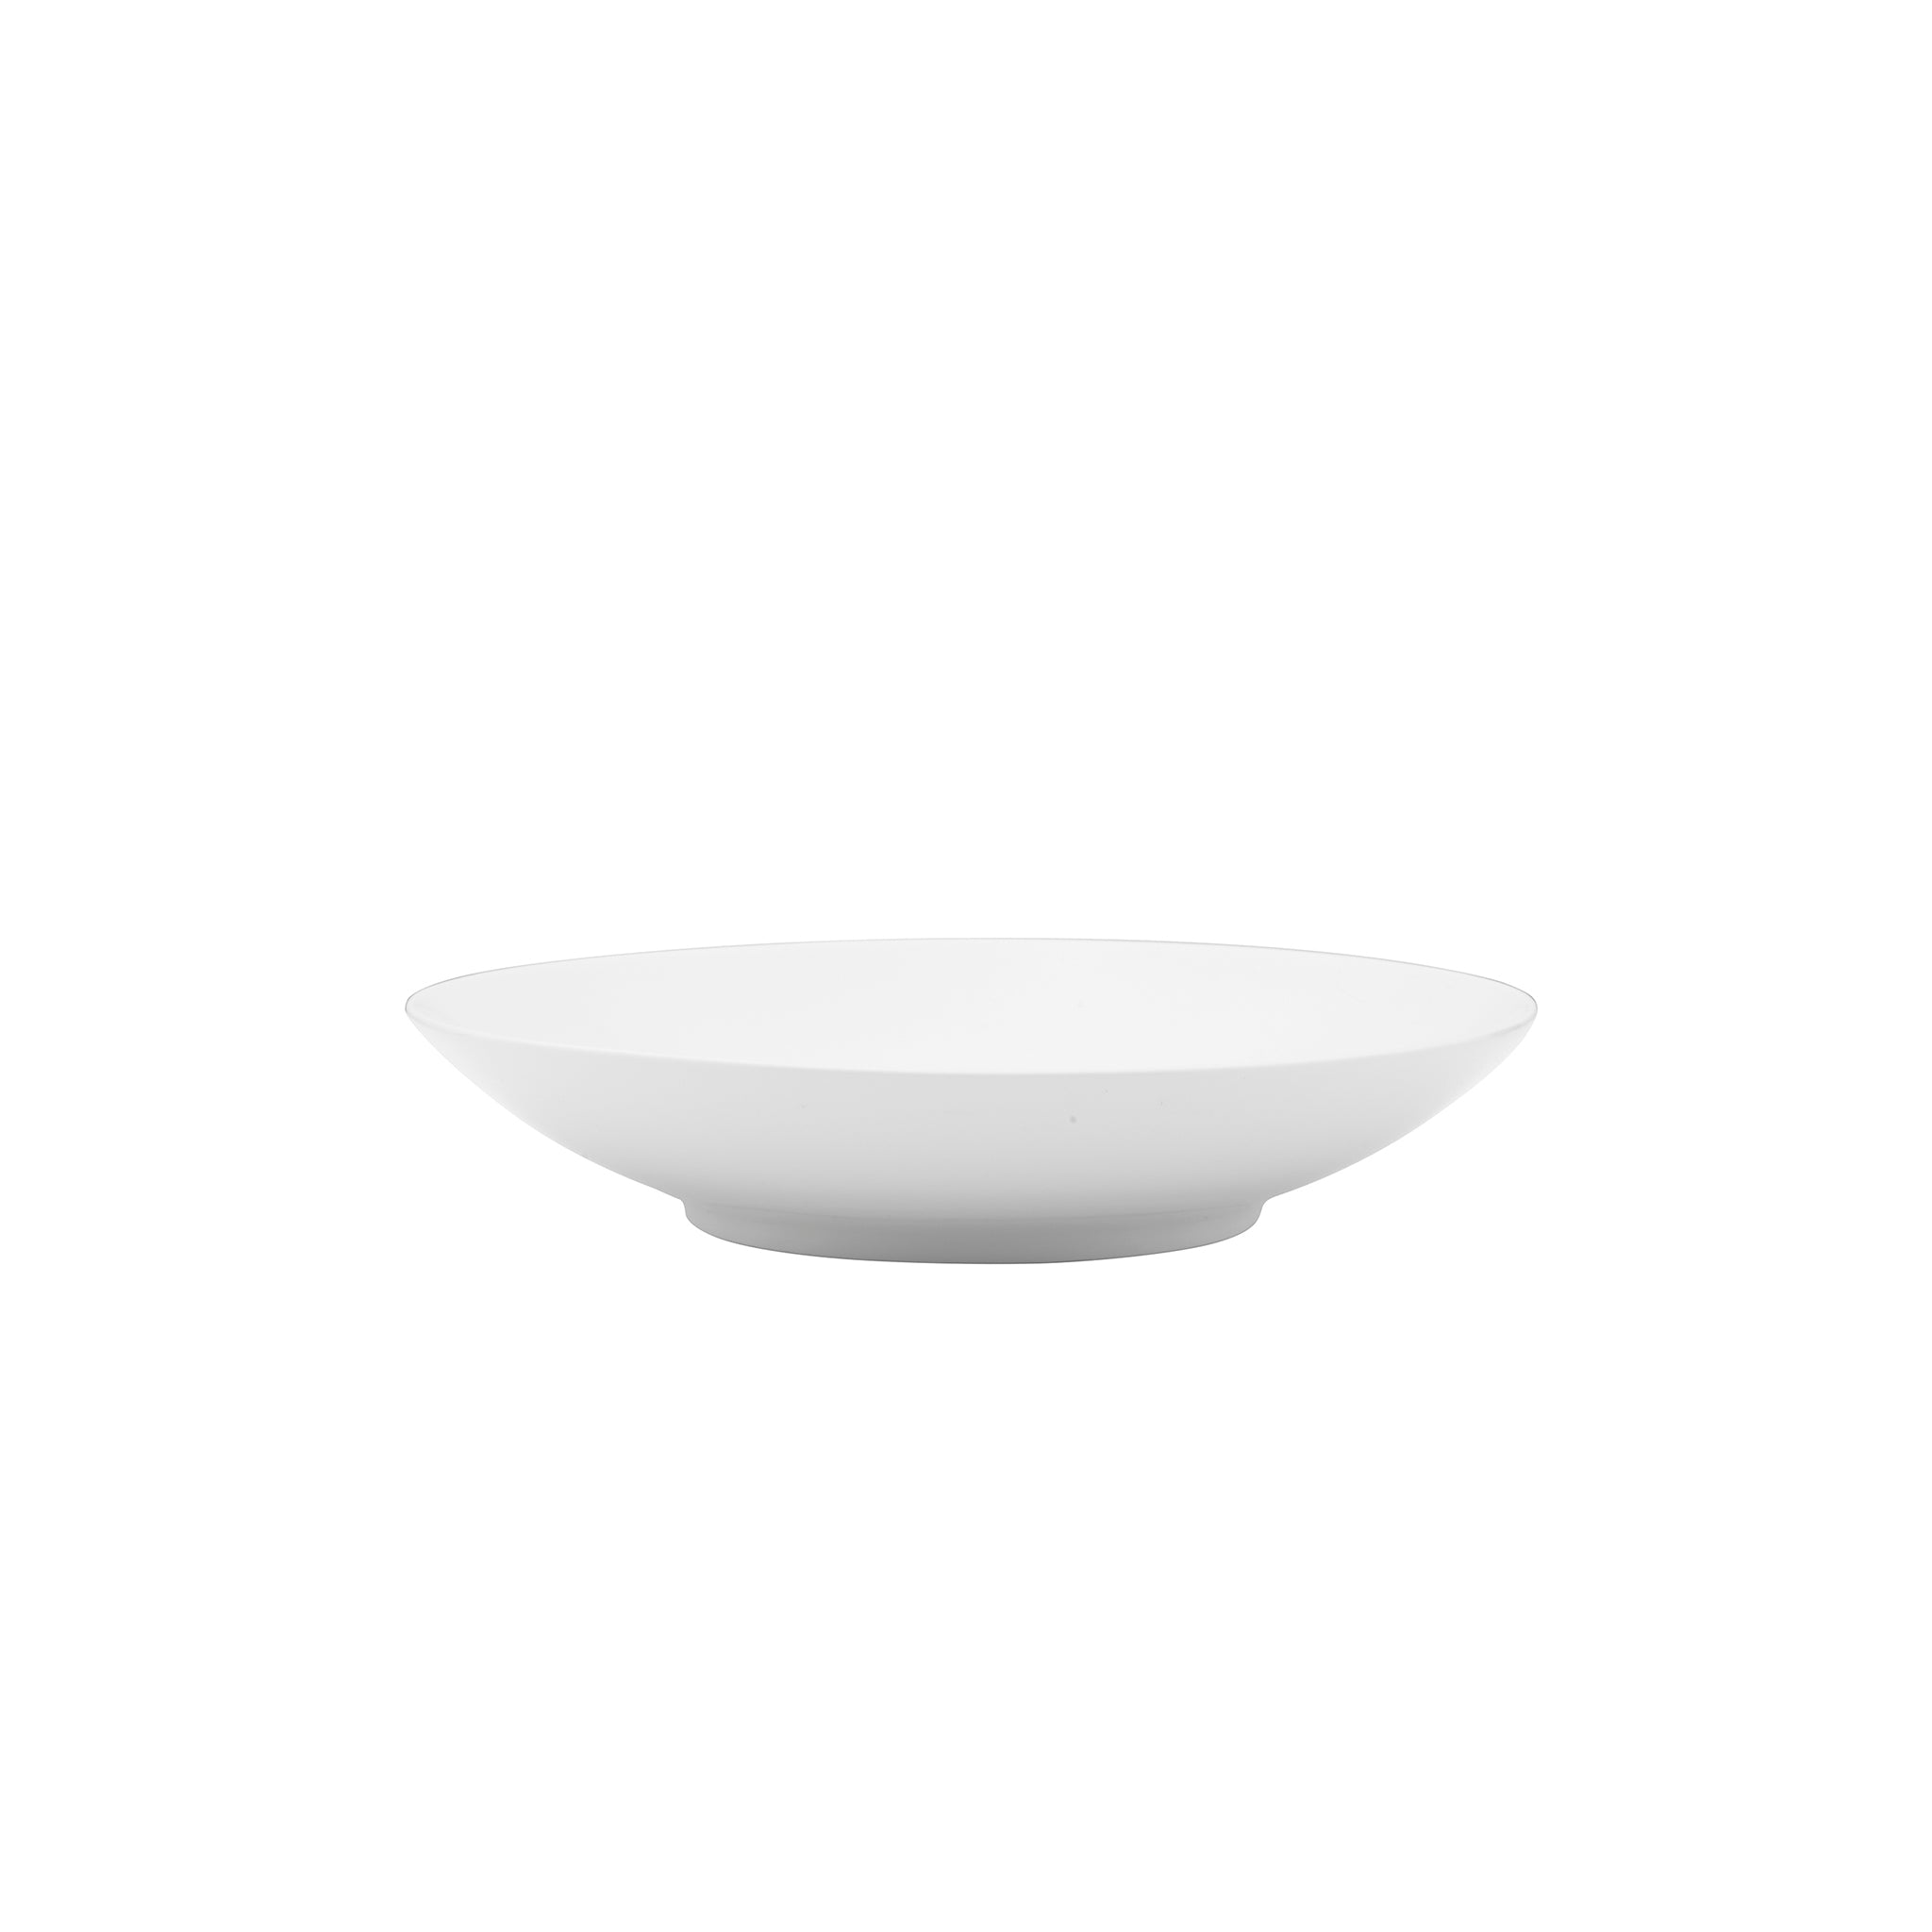 Galleria Porcelain Deep Coupe Plate 8.7" White